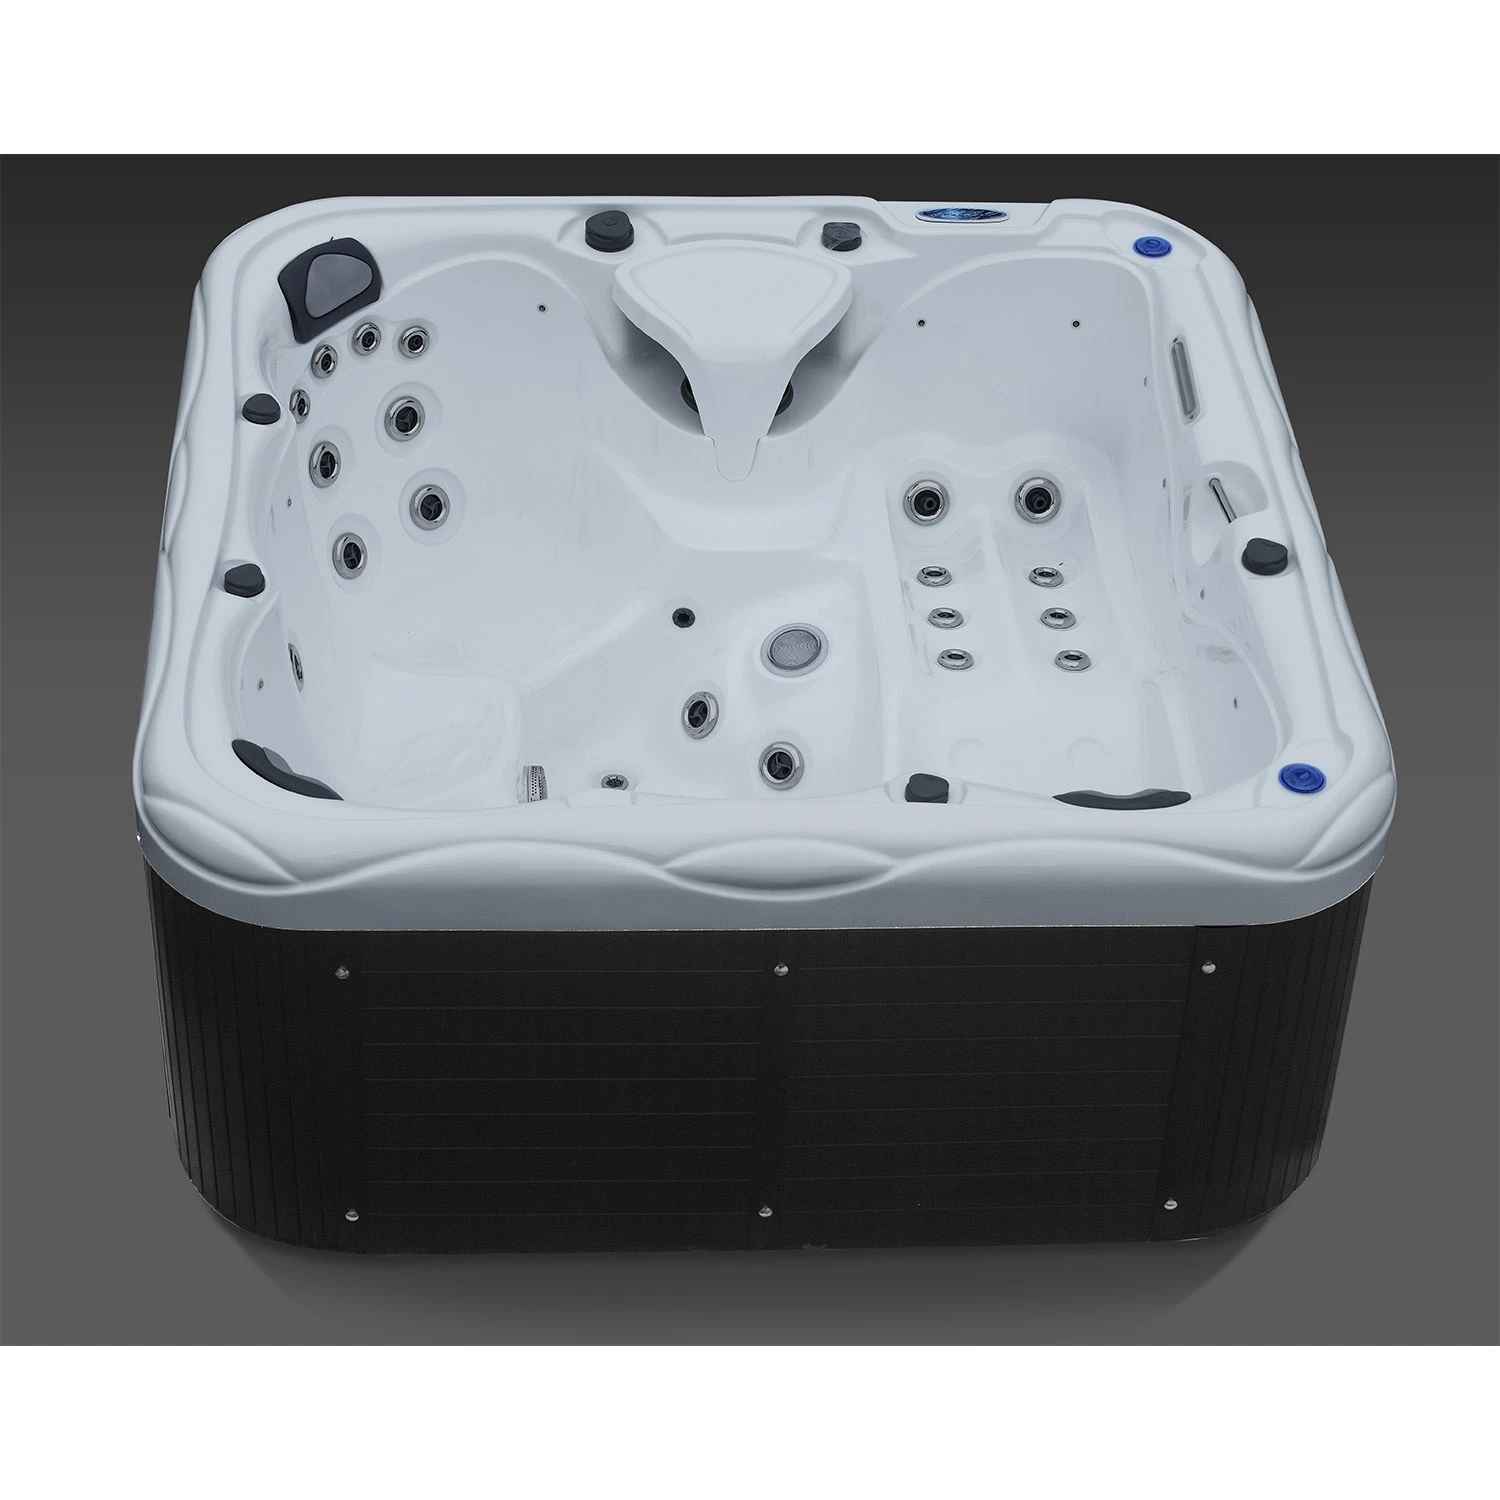 Hot Sale Home Jaccuzzi Massage Bathtub Hot Tub Free Standing Luxury Outdoor Hydrotherapy Massage SPA